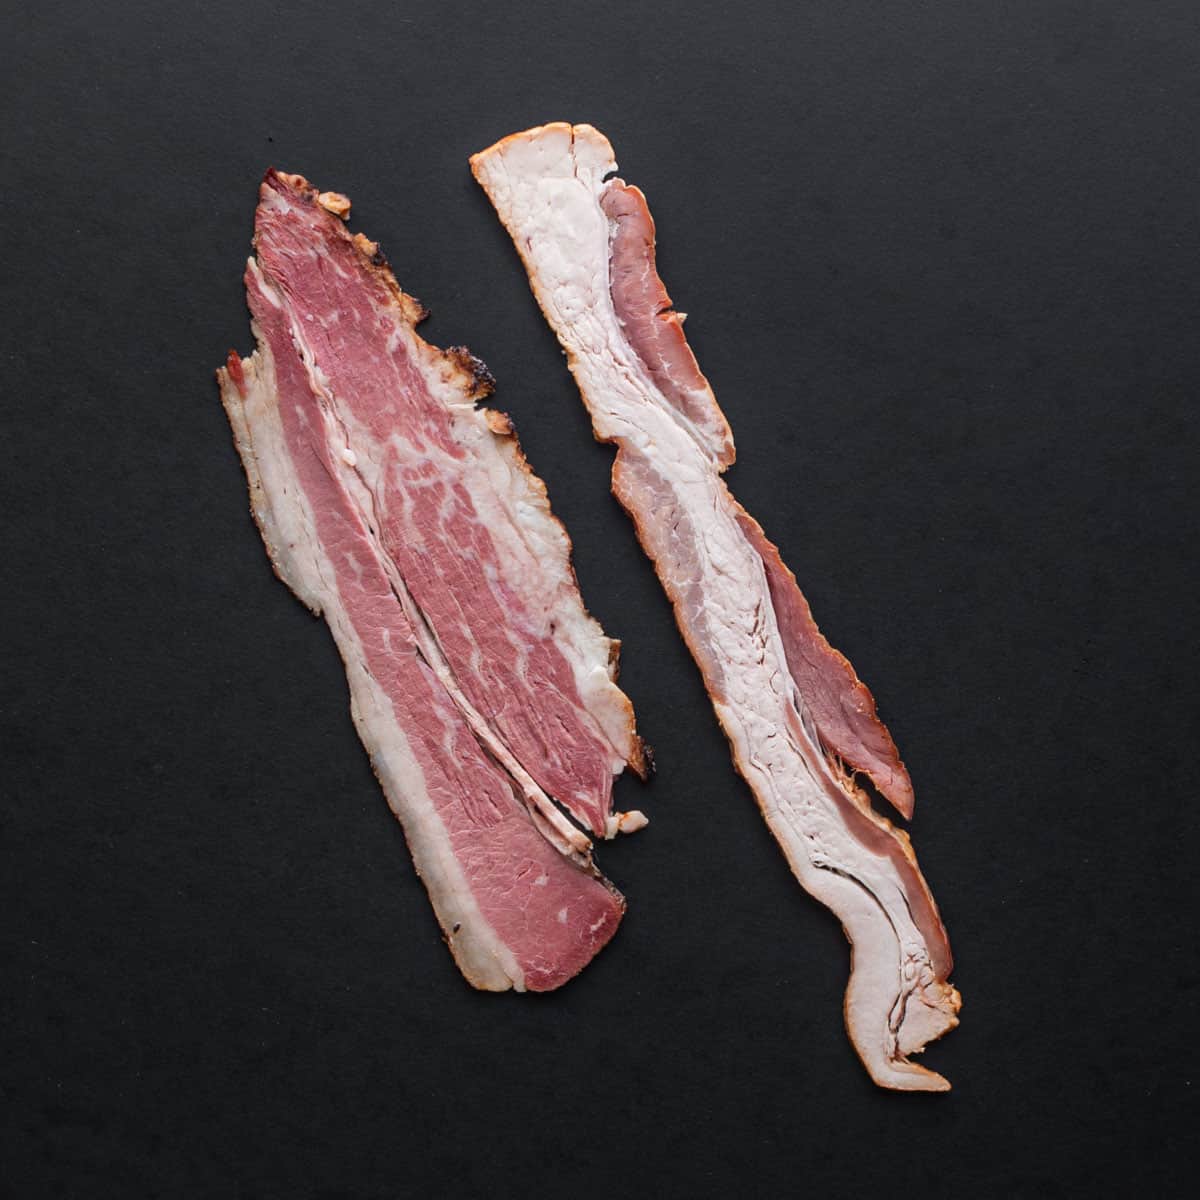 A slice of raw beef bacon next to pork bacon on a black background.